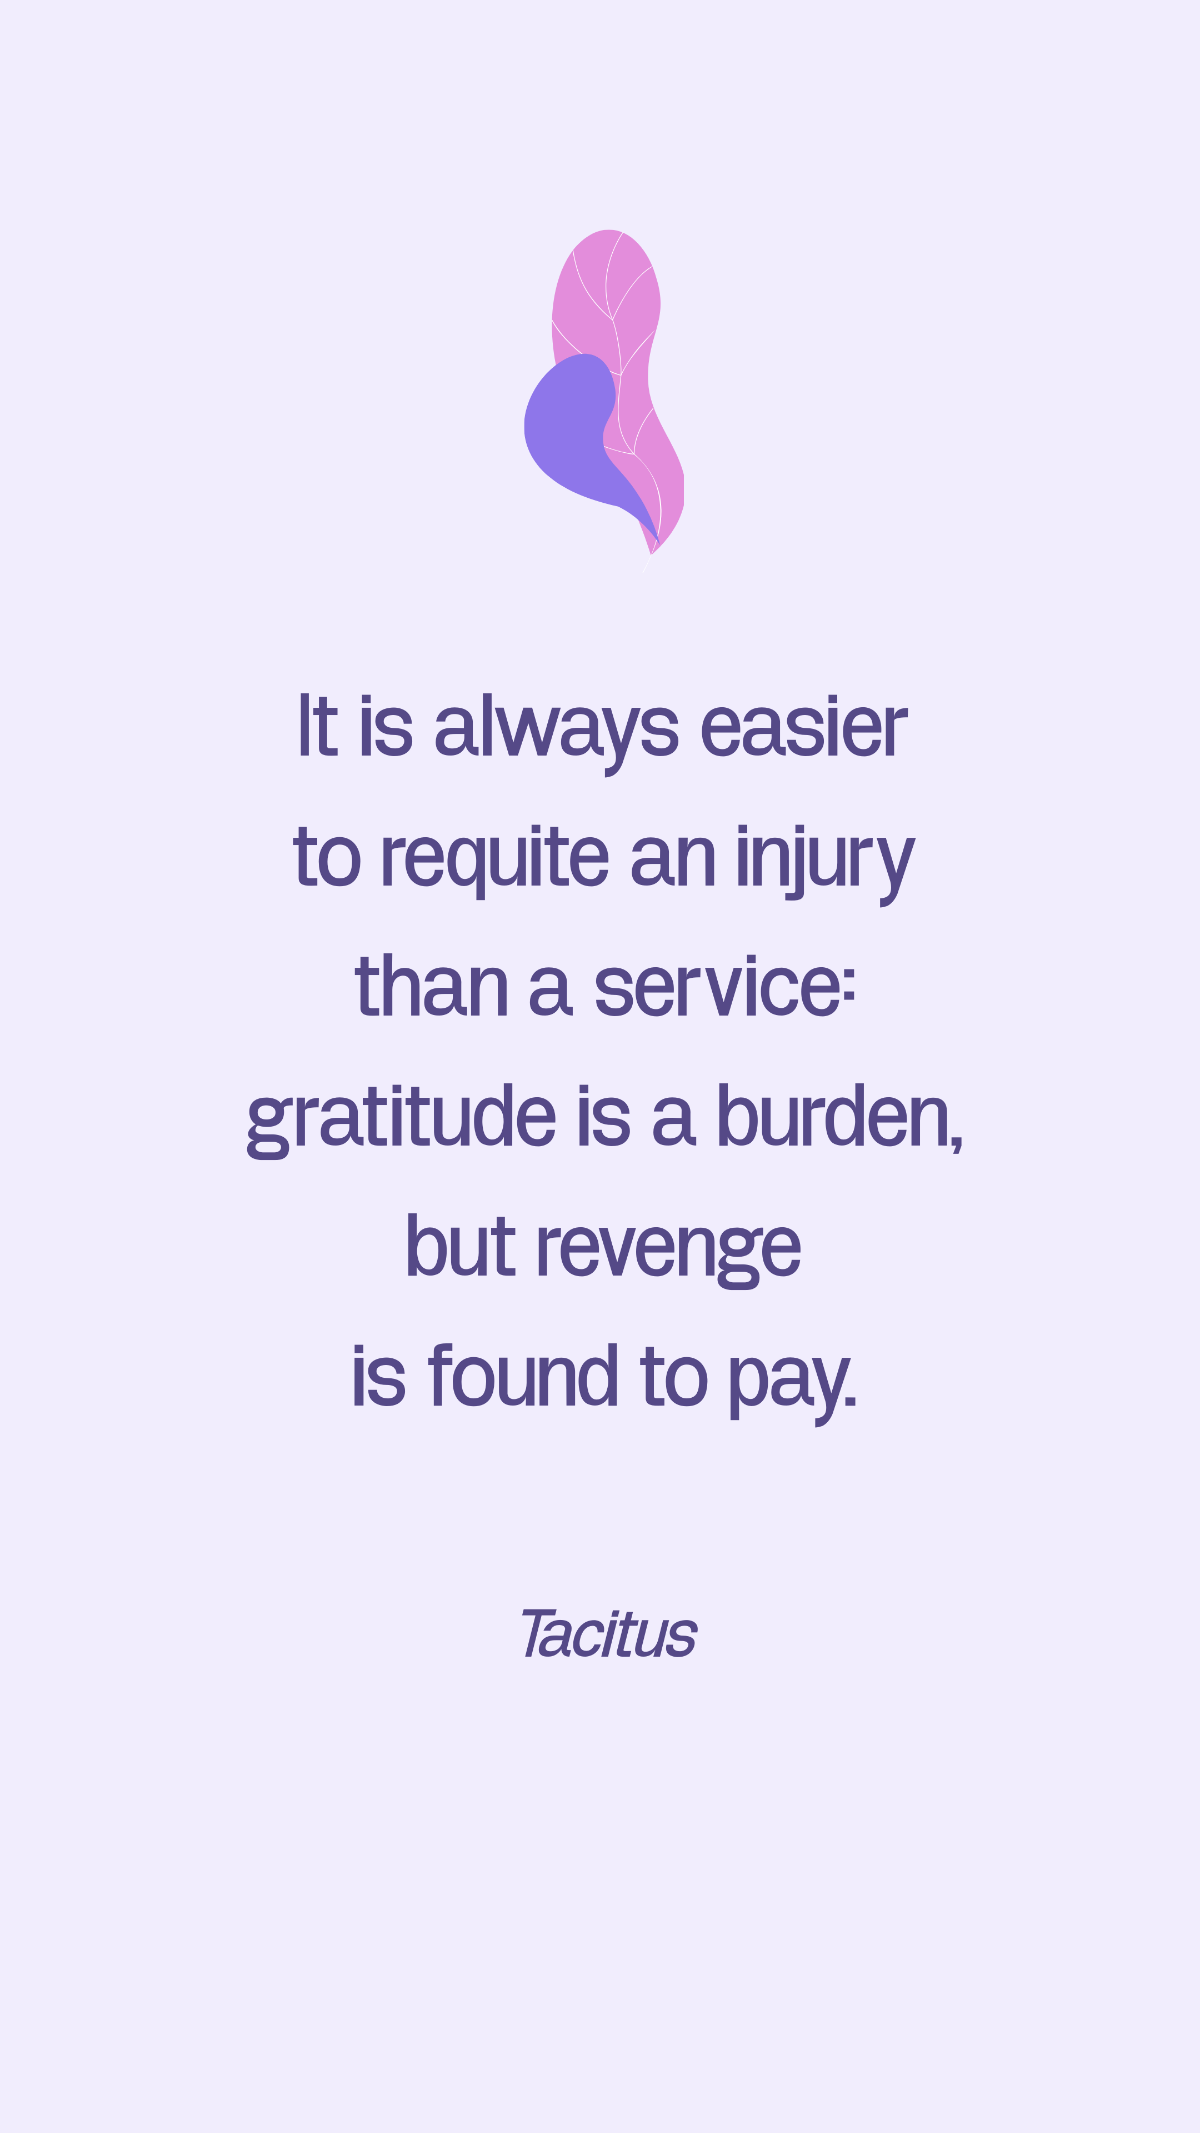 Tacitus - It is always easier to requite an injury than a service: gratitude is a burden, but revenge is found to pay. Template